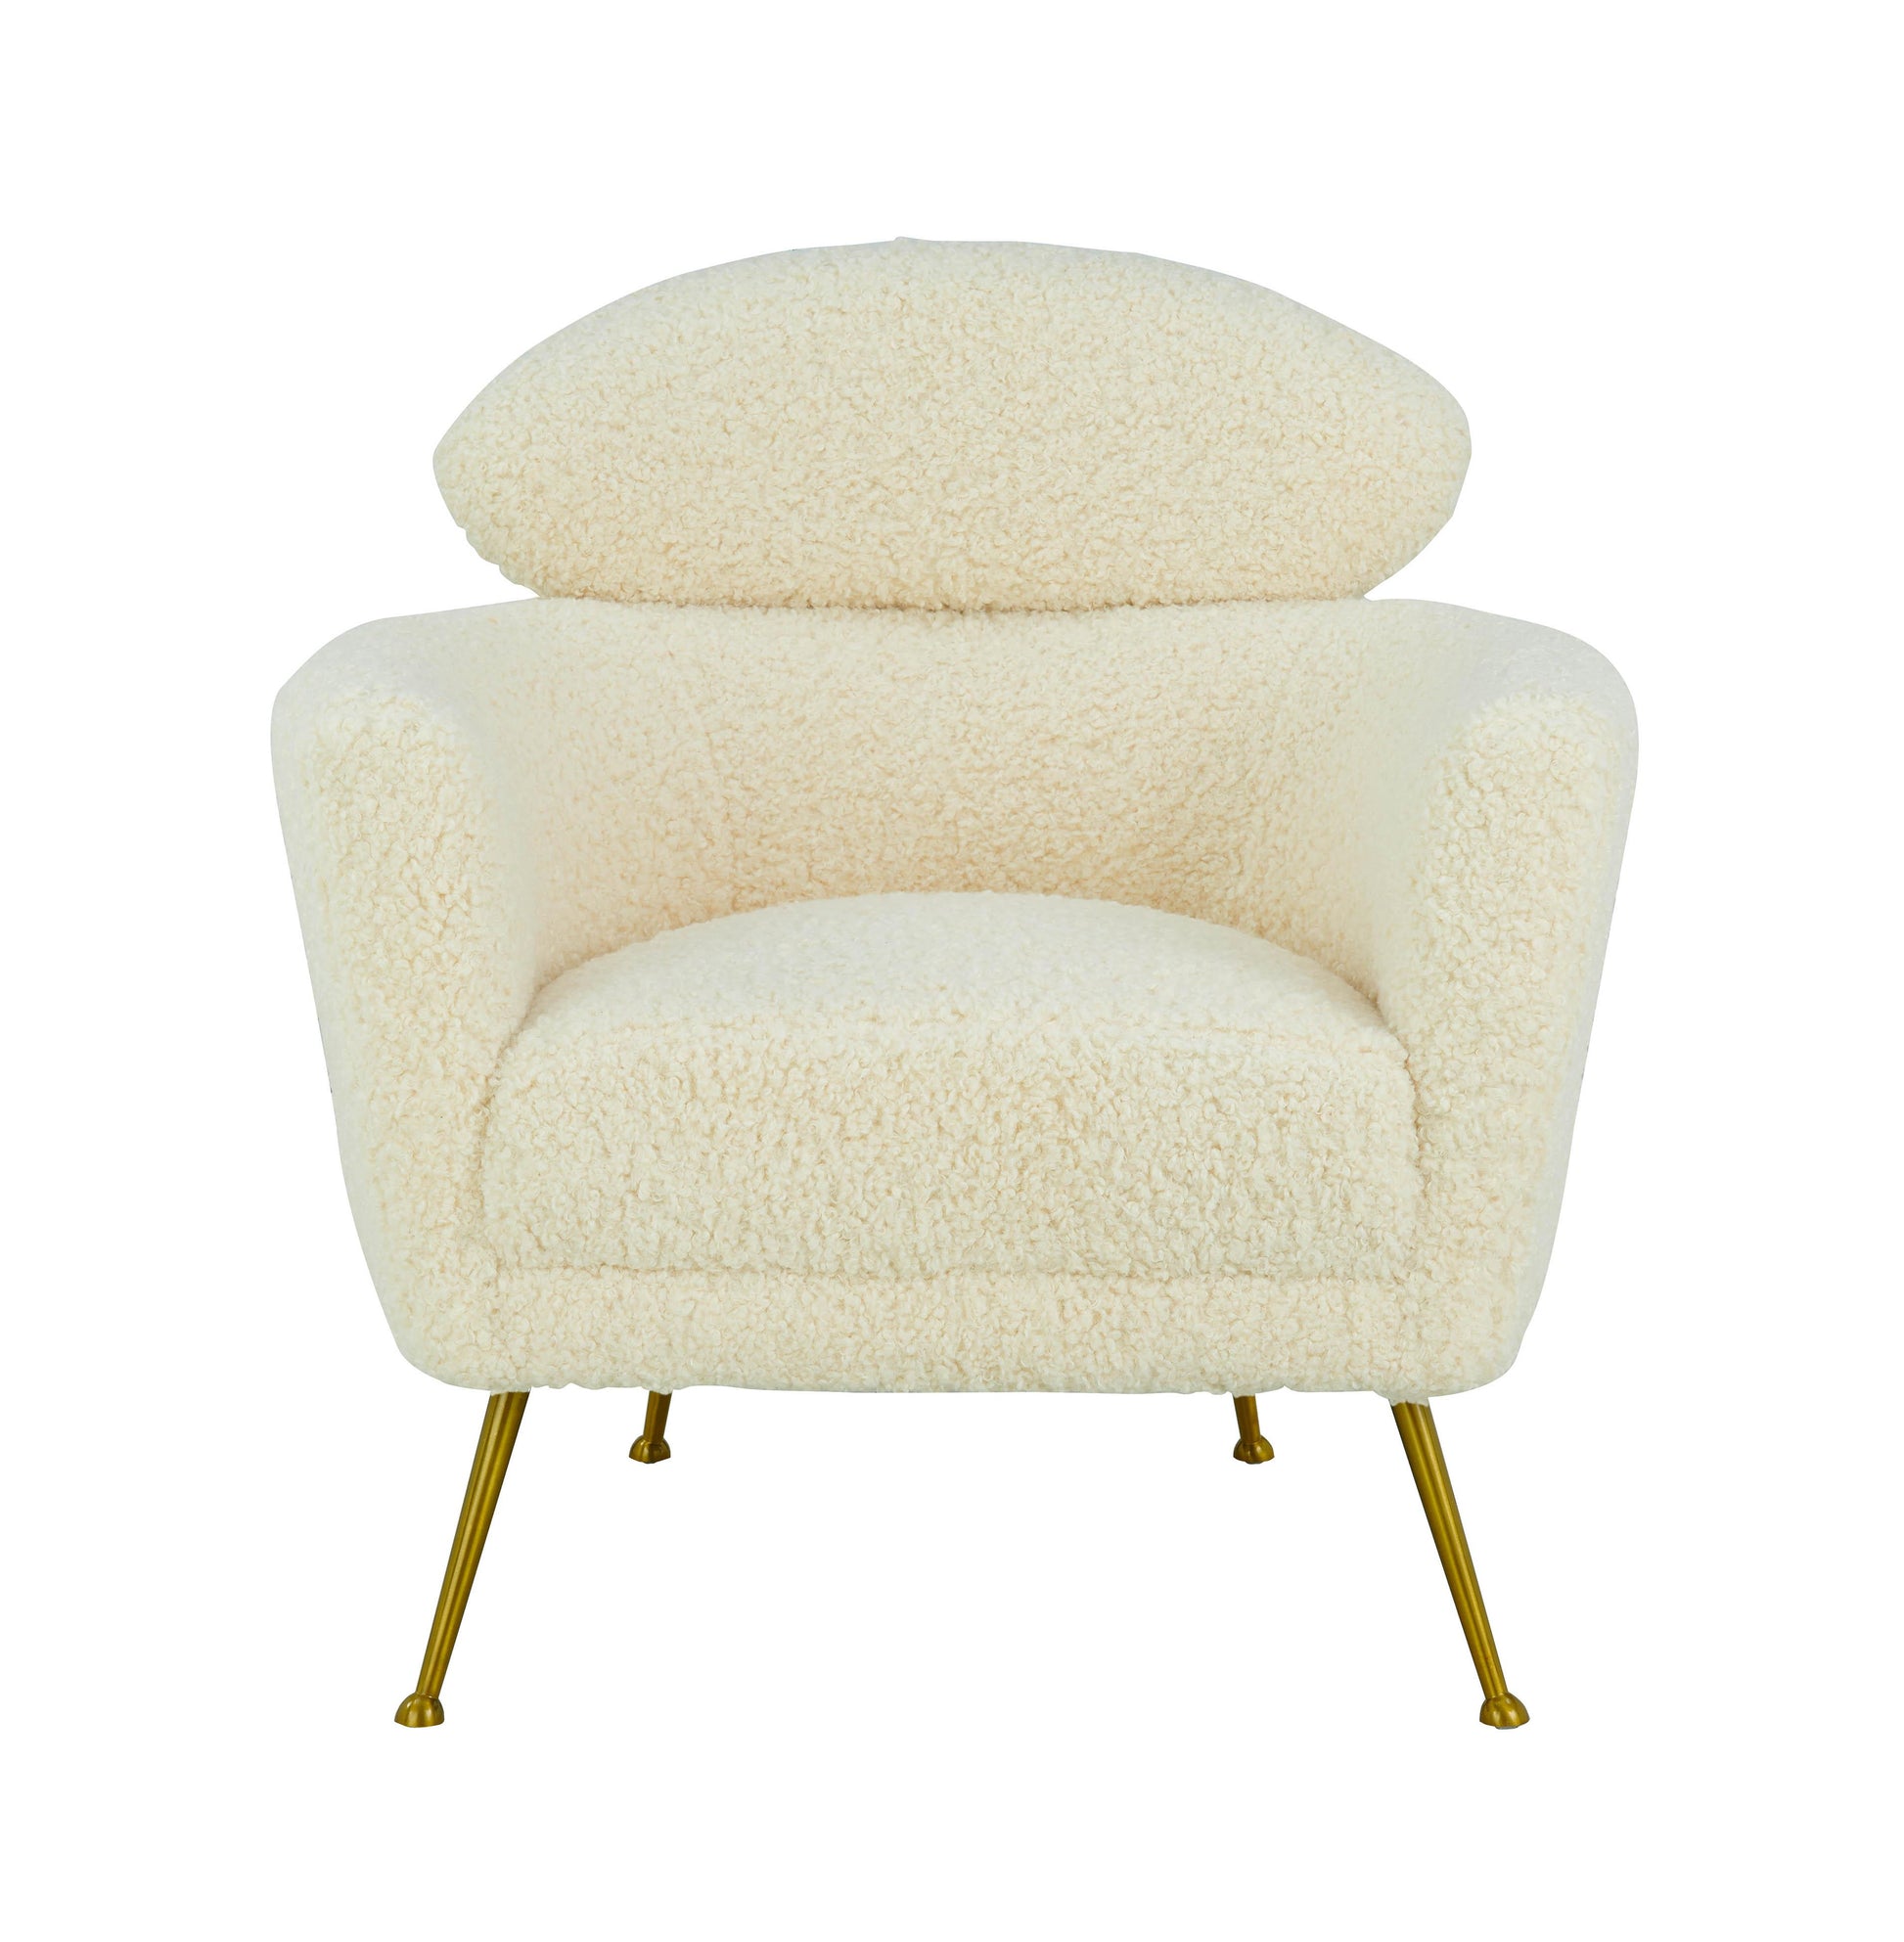 Tov Furniture Welsh Faux Shearling Chair